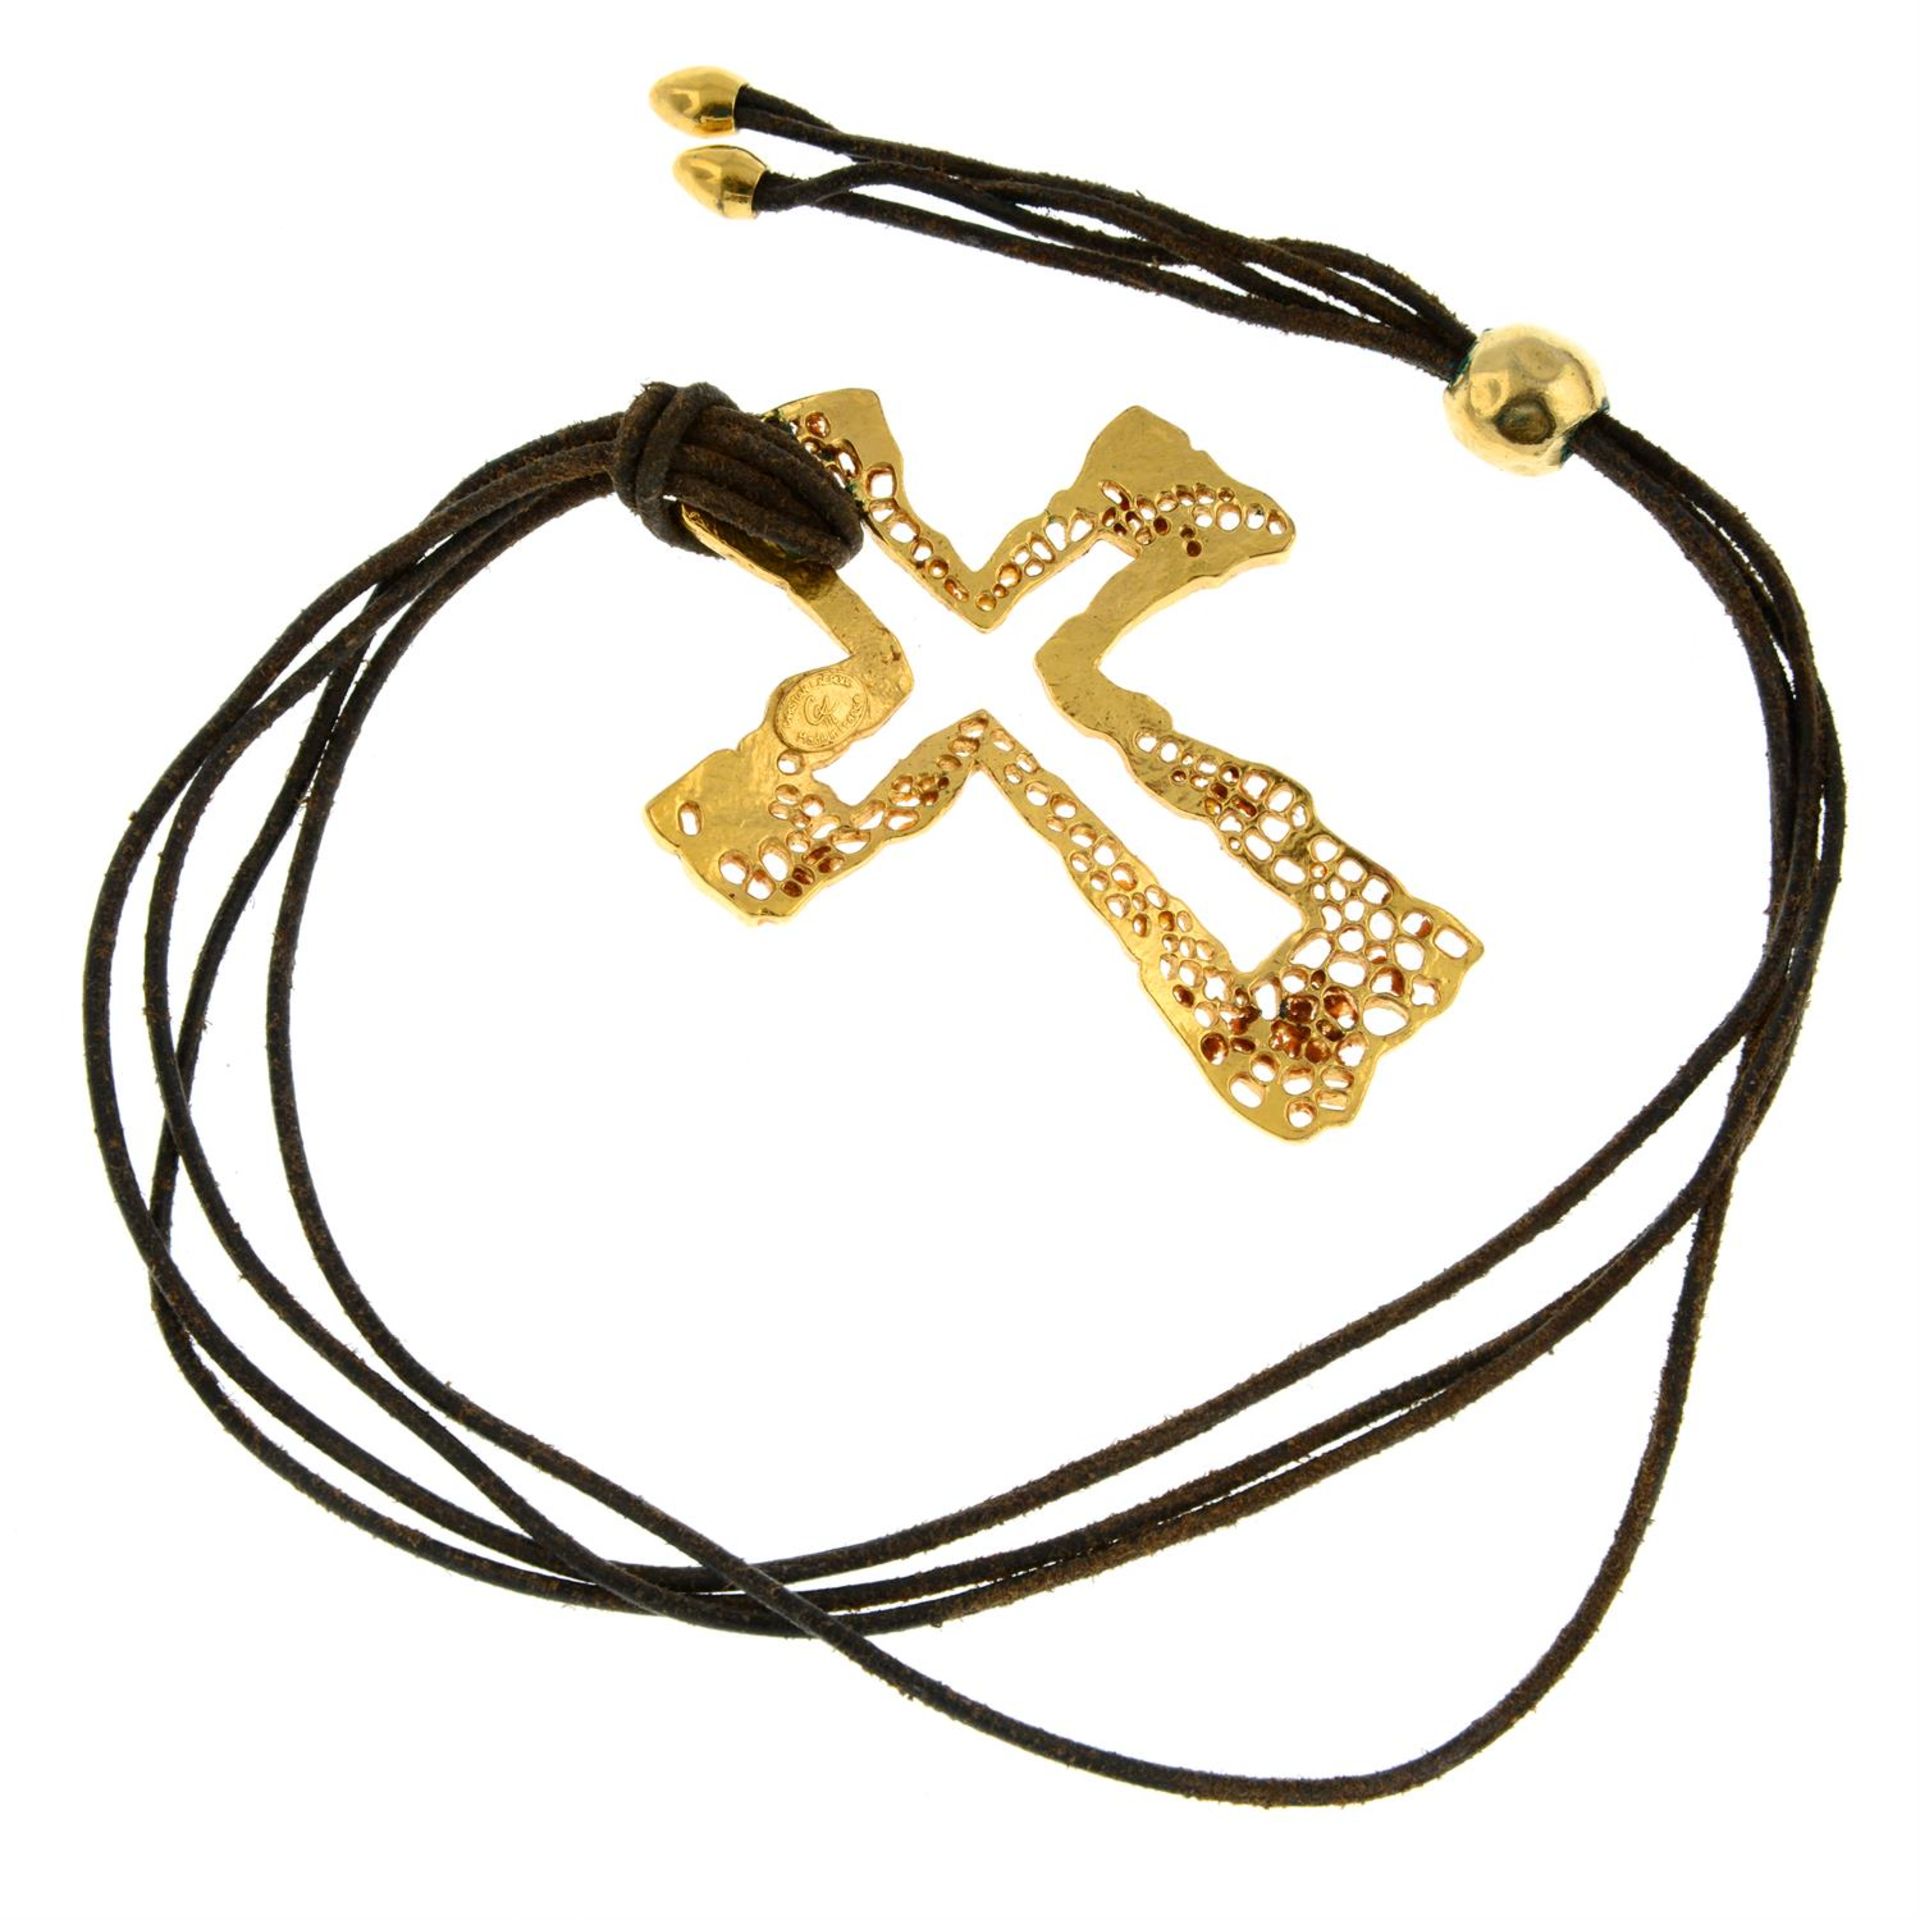 CHRISTIAN LACROIX - a cross pendant on leather cord. - Image 2 of 2